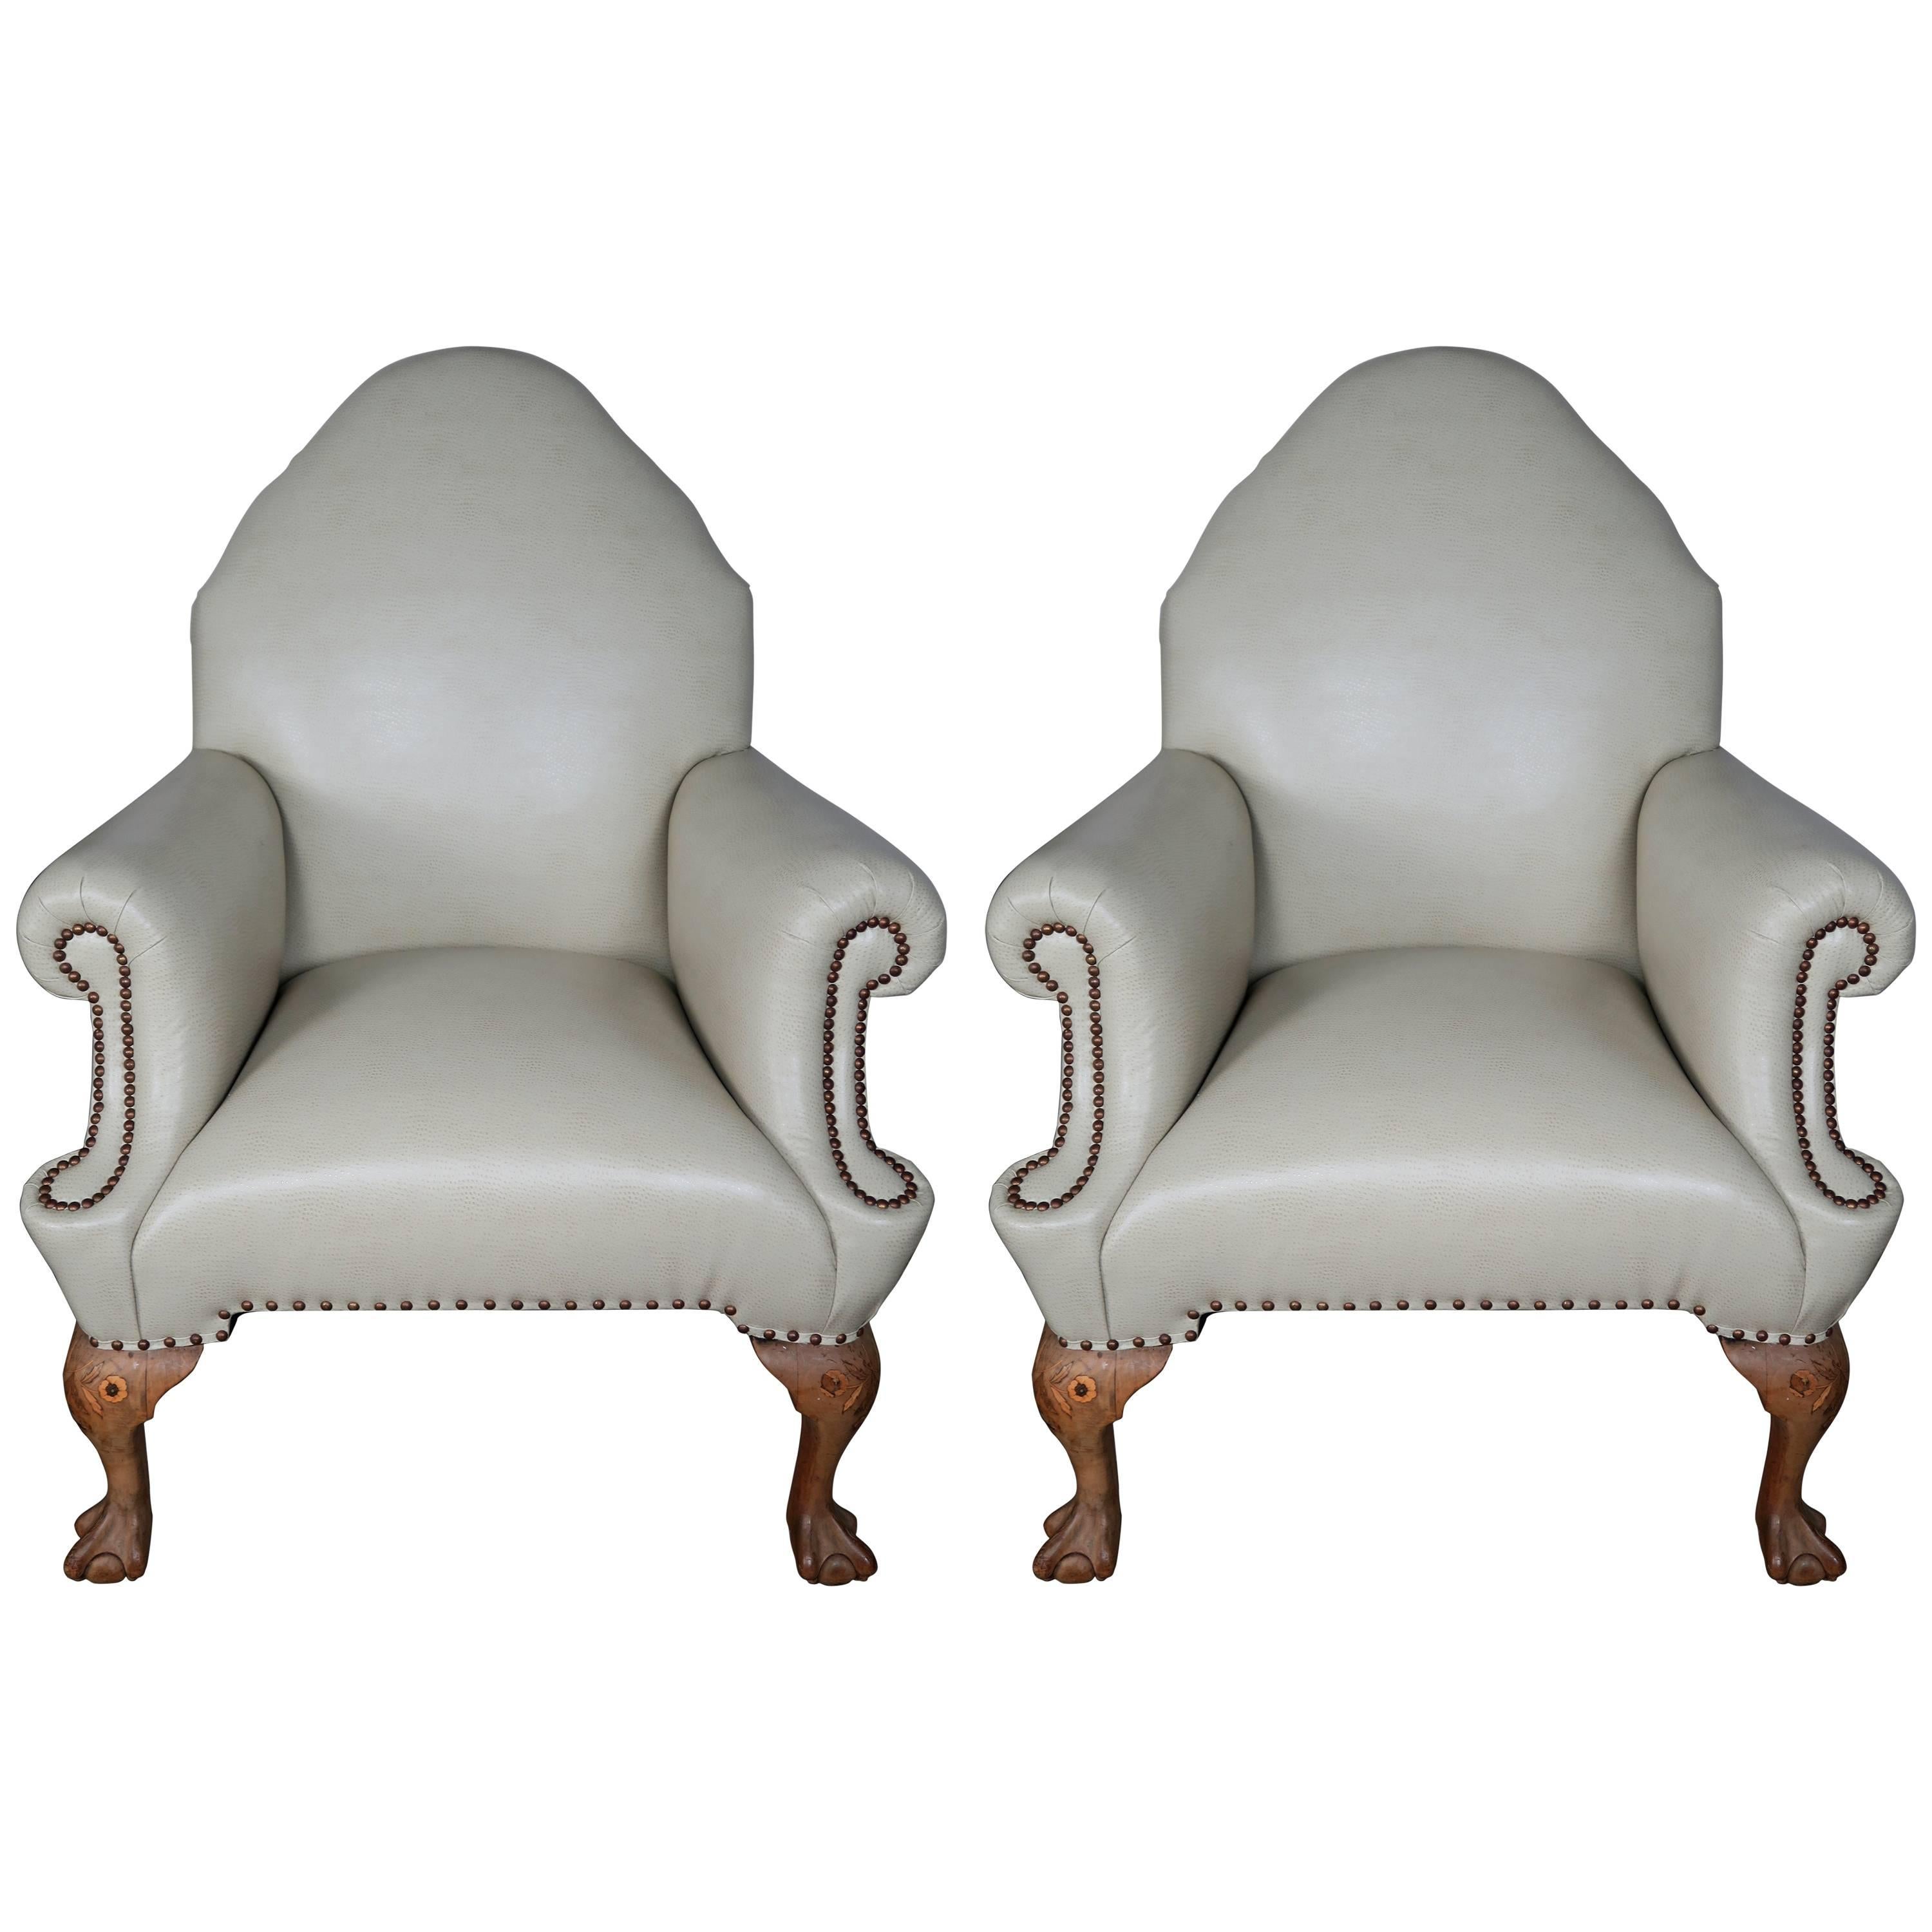 Pair of English Chippendale Style Armchairs